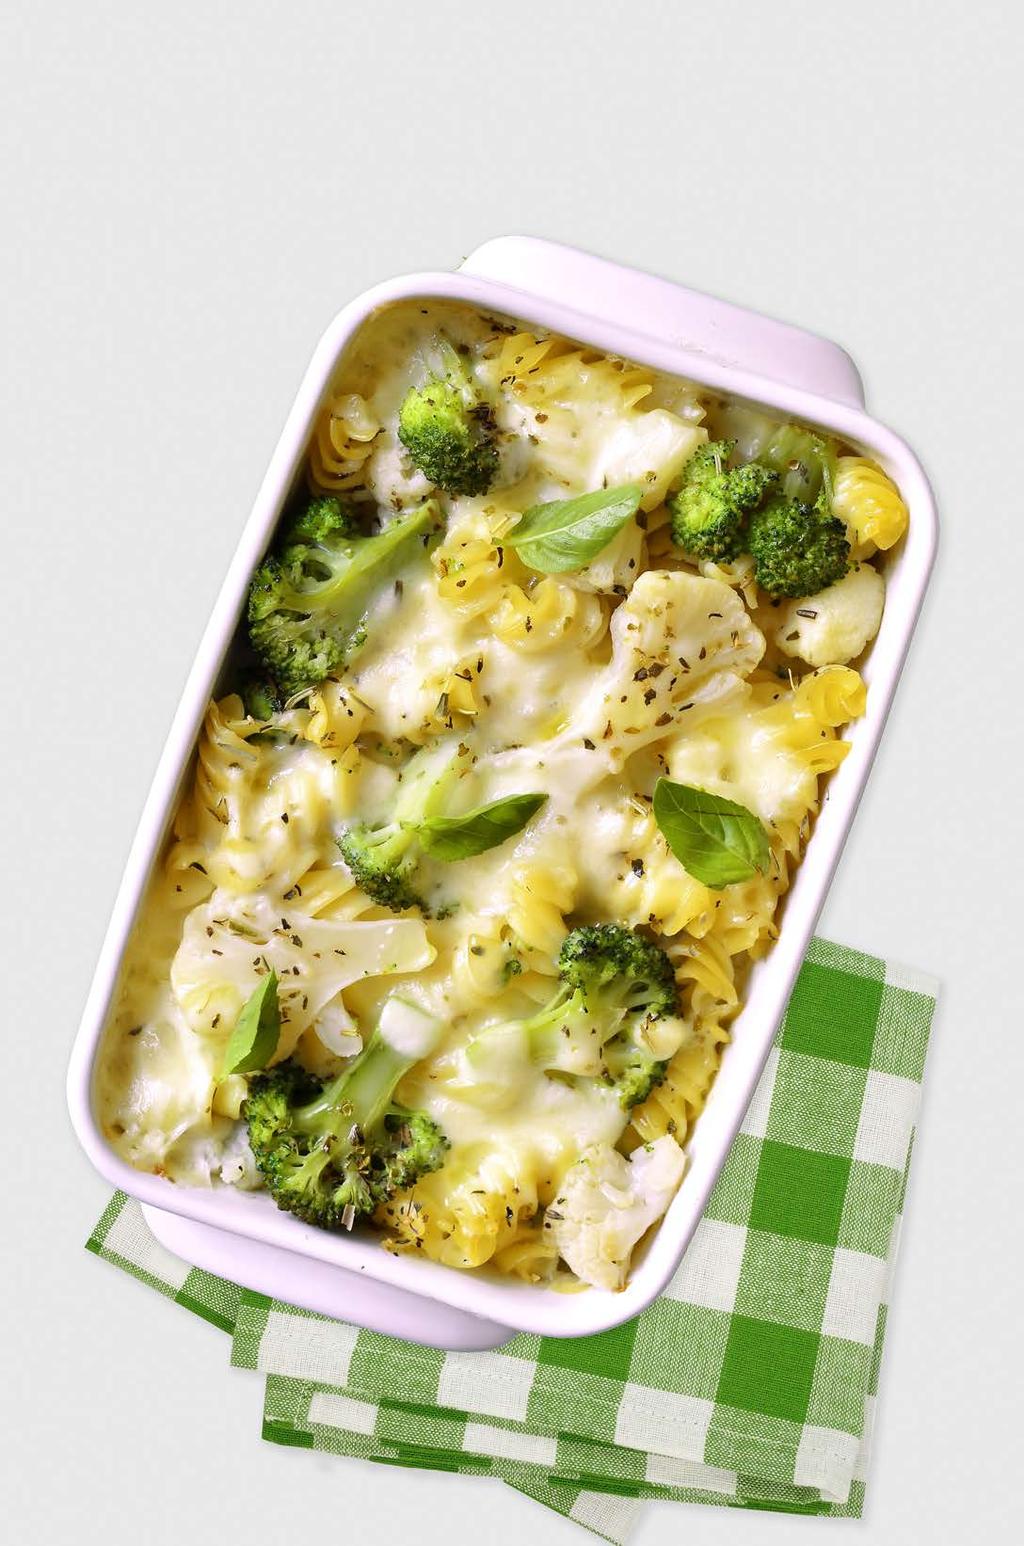 Broccoli cauliflower casserole. This creamy casserole can be made a day ahead, refrigerated and then baked just before dinner. Using frozen vegetables makes this dish a cinch.